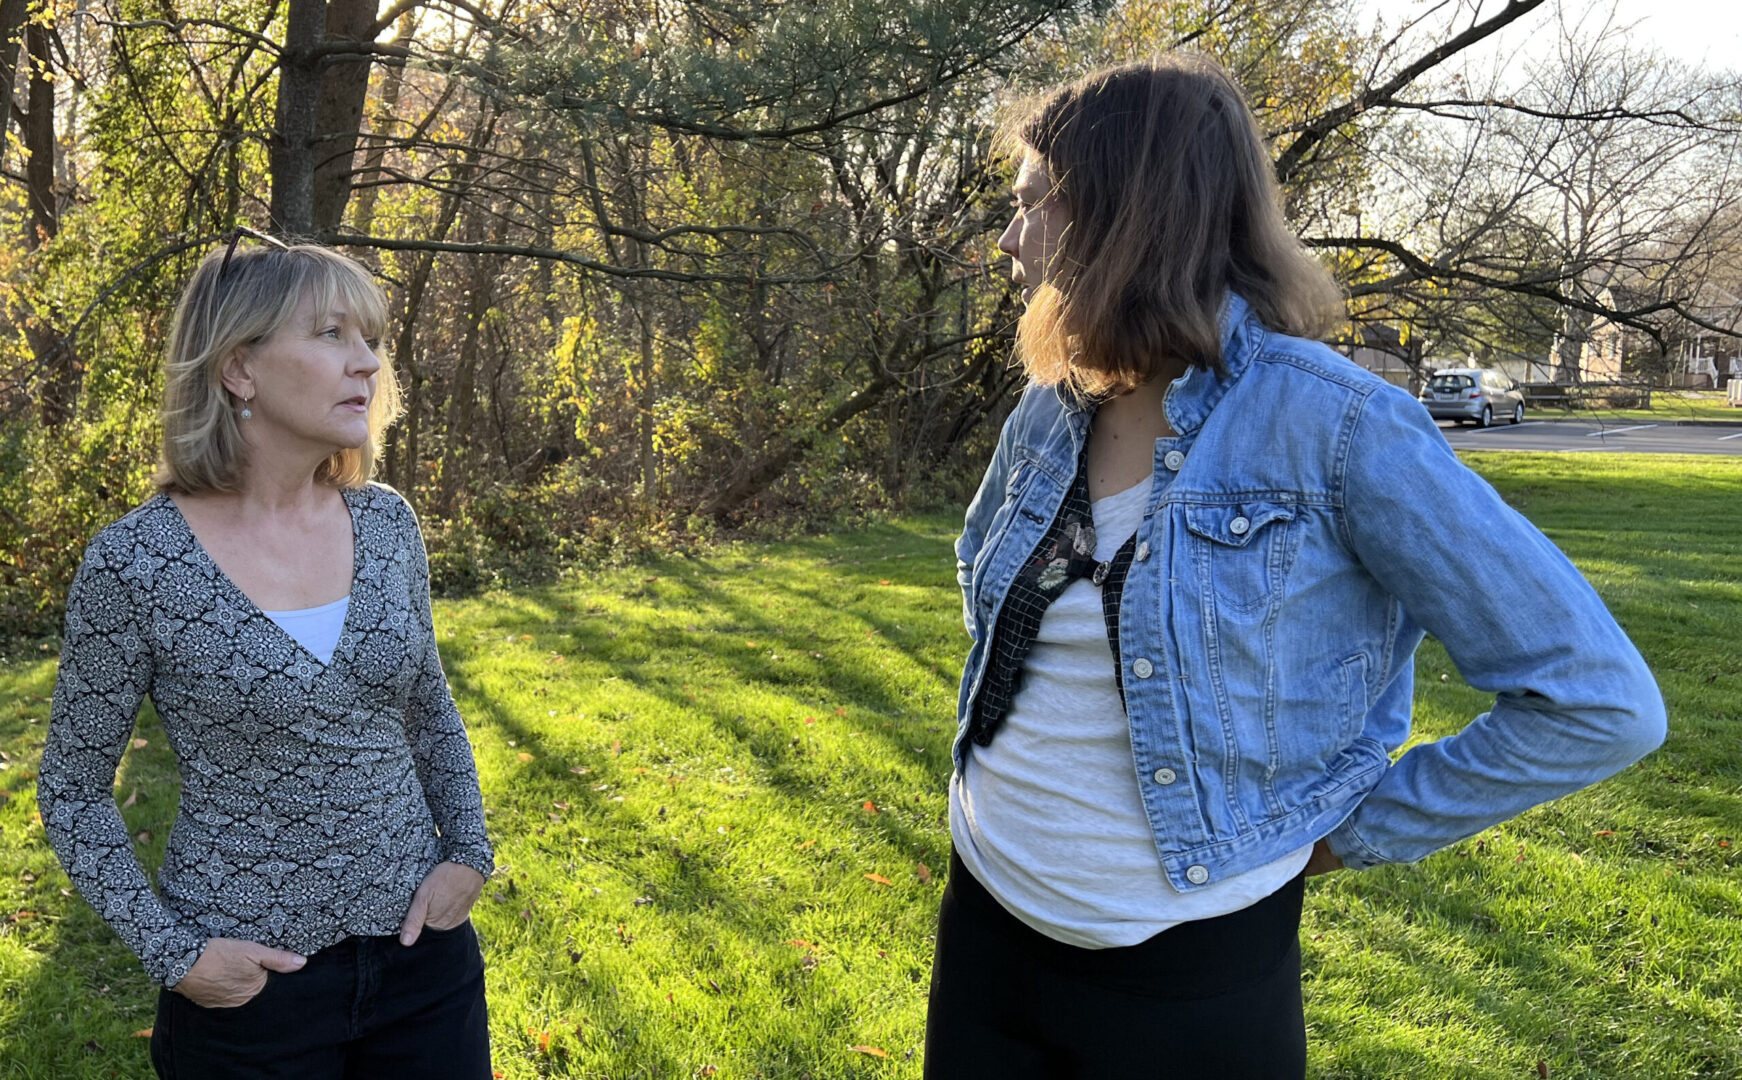 Martha Stringer, at left, talks with her daughter Kimberly Stringer, at right. The Stringers have filed a lawsuit against Bucks County Correctional Facility employees after Kimberly was pepper-sprayed and restrained while detained there while suffering from a mental health condition.